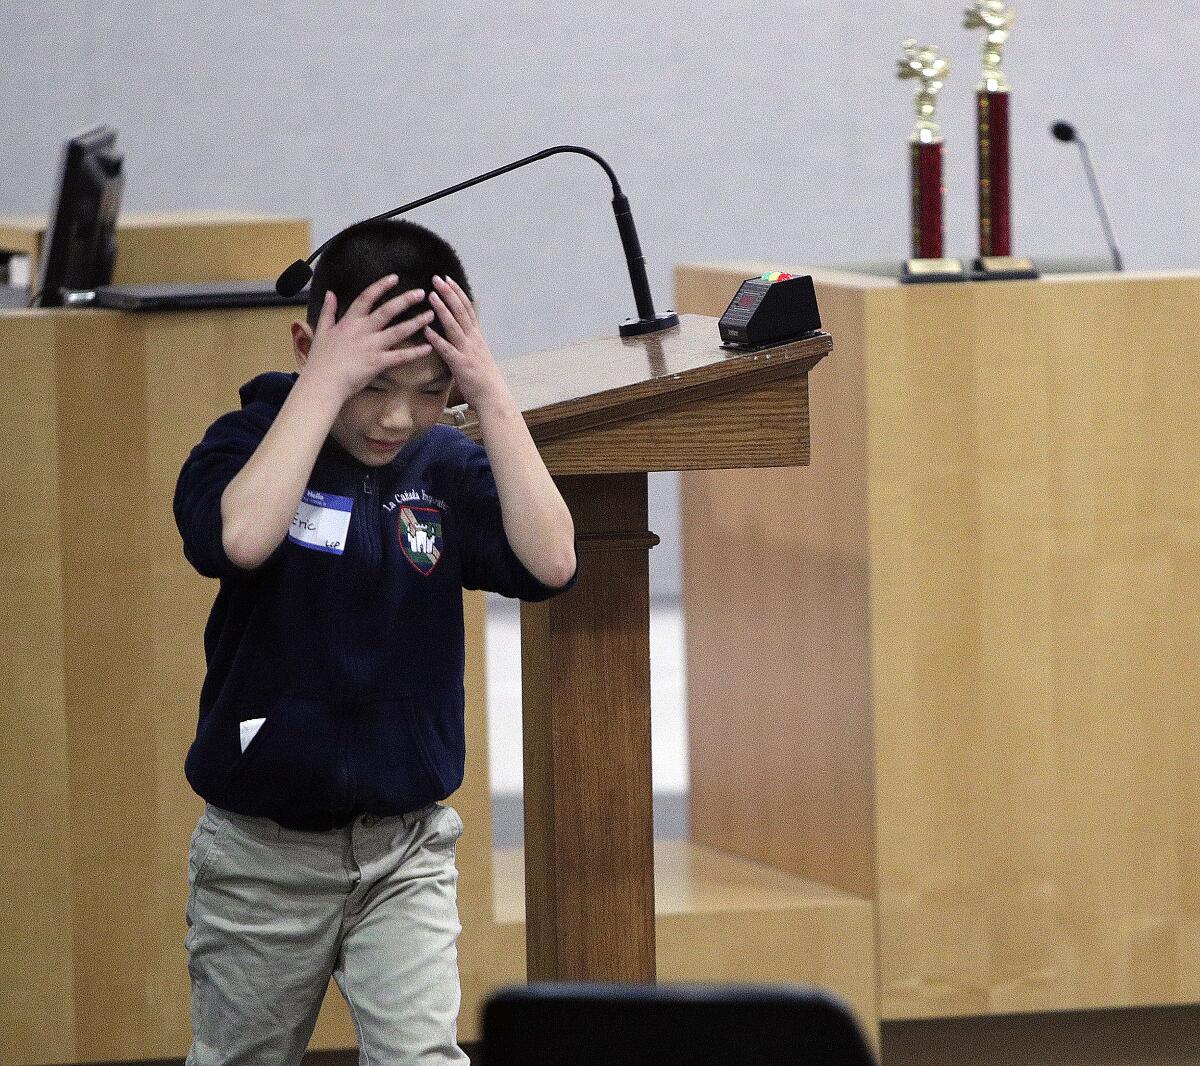 La Cañada Preparatory School's Eric Truong leaves the podium in upset after spelling a word incorrectly in the LCUSD district spelling bee on Monday, January 13, 2020.